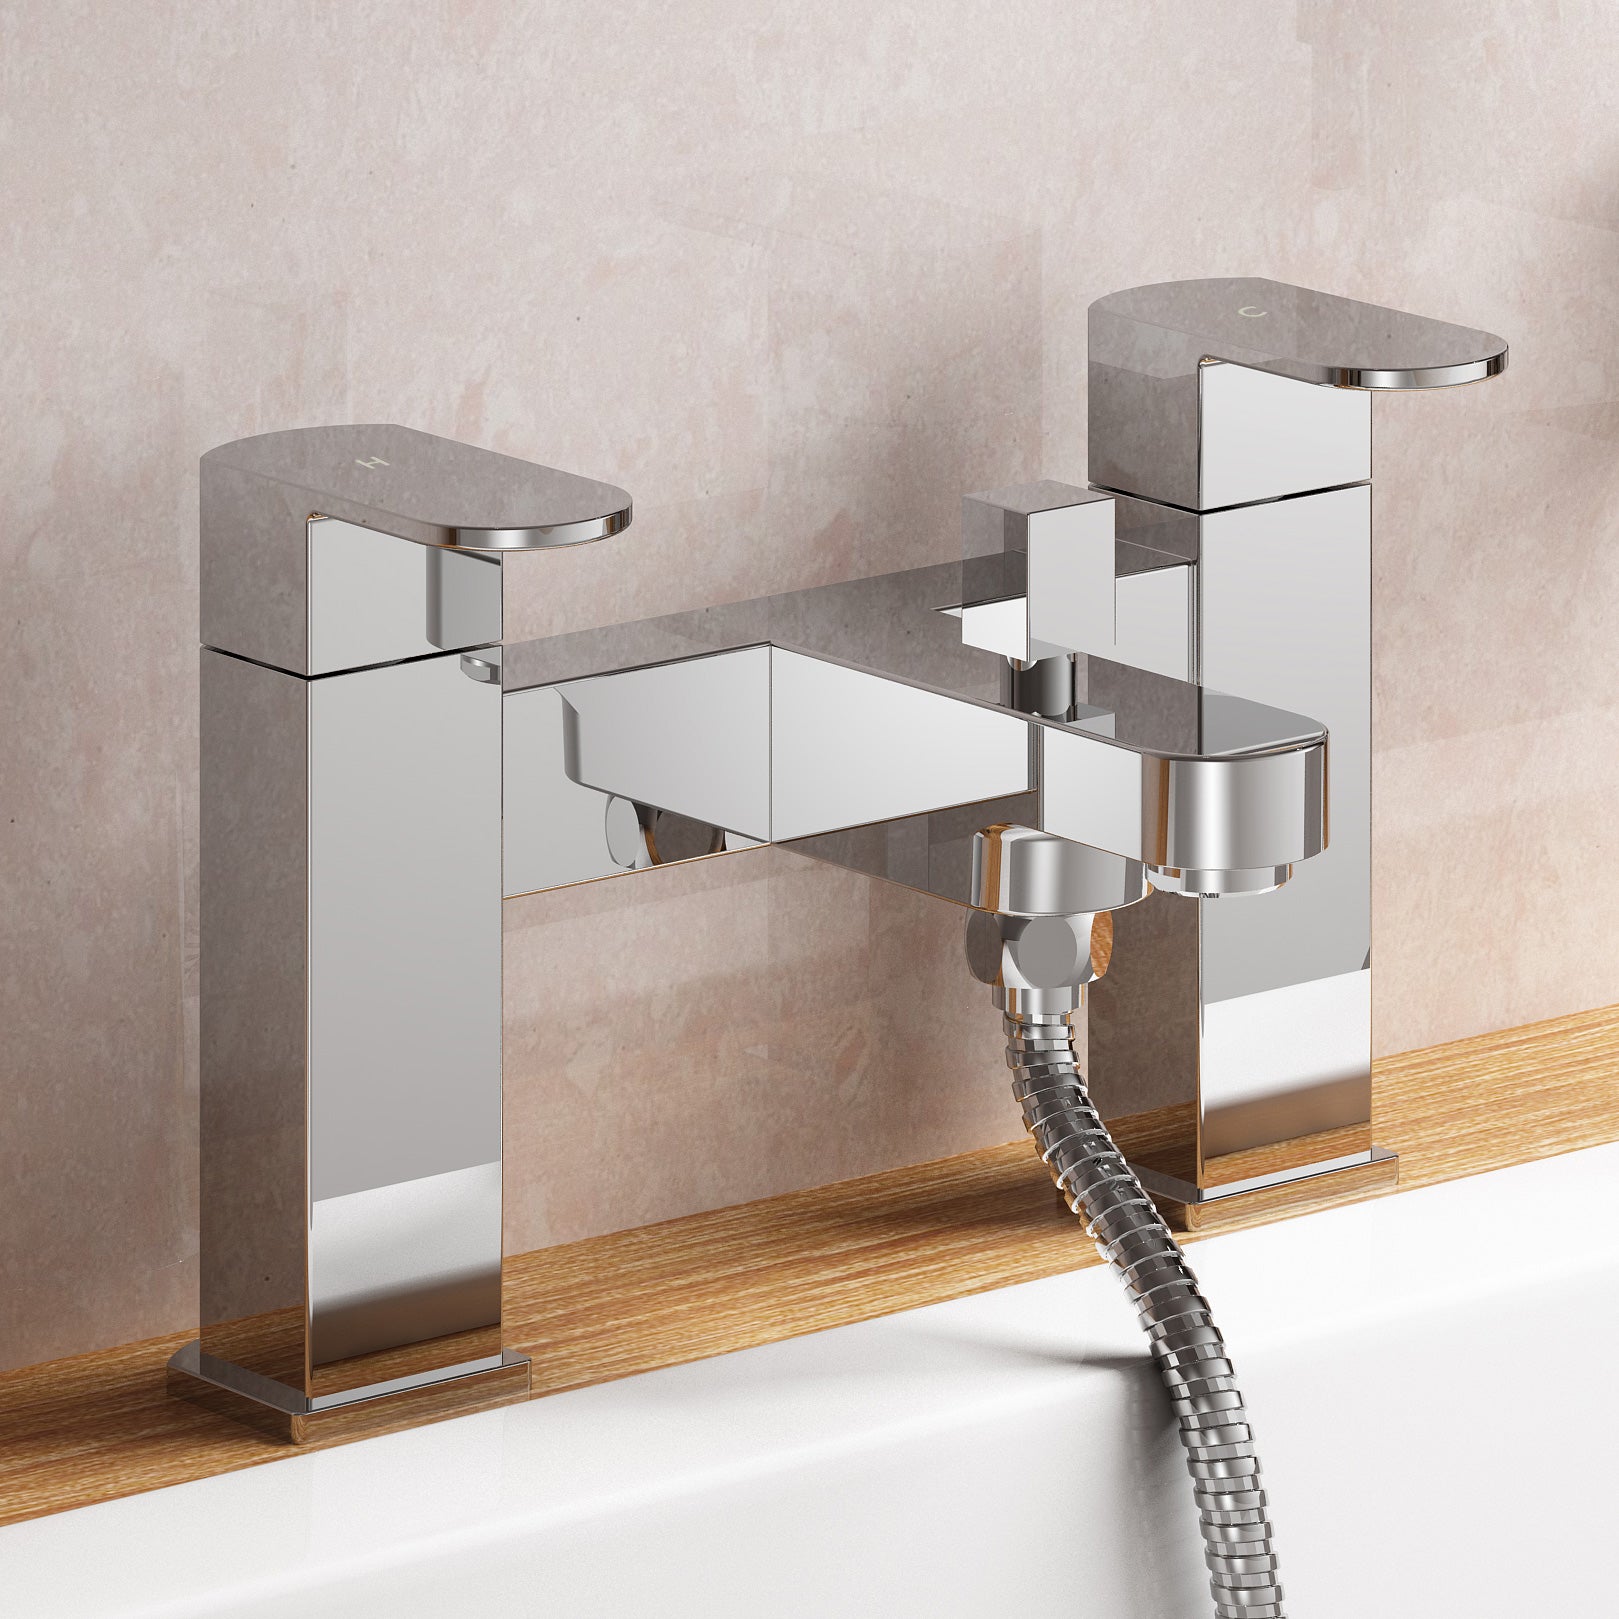 Eclipse Modern Bathroom Bath Shower Twin Lever Mixer Taps With Hand Held